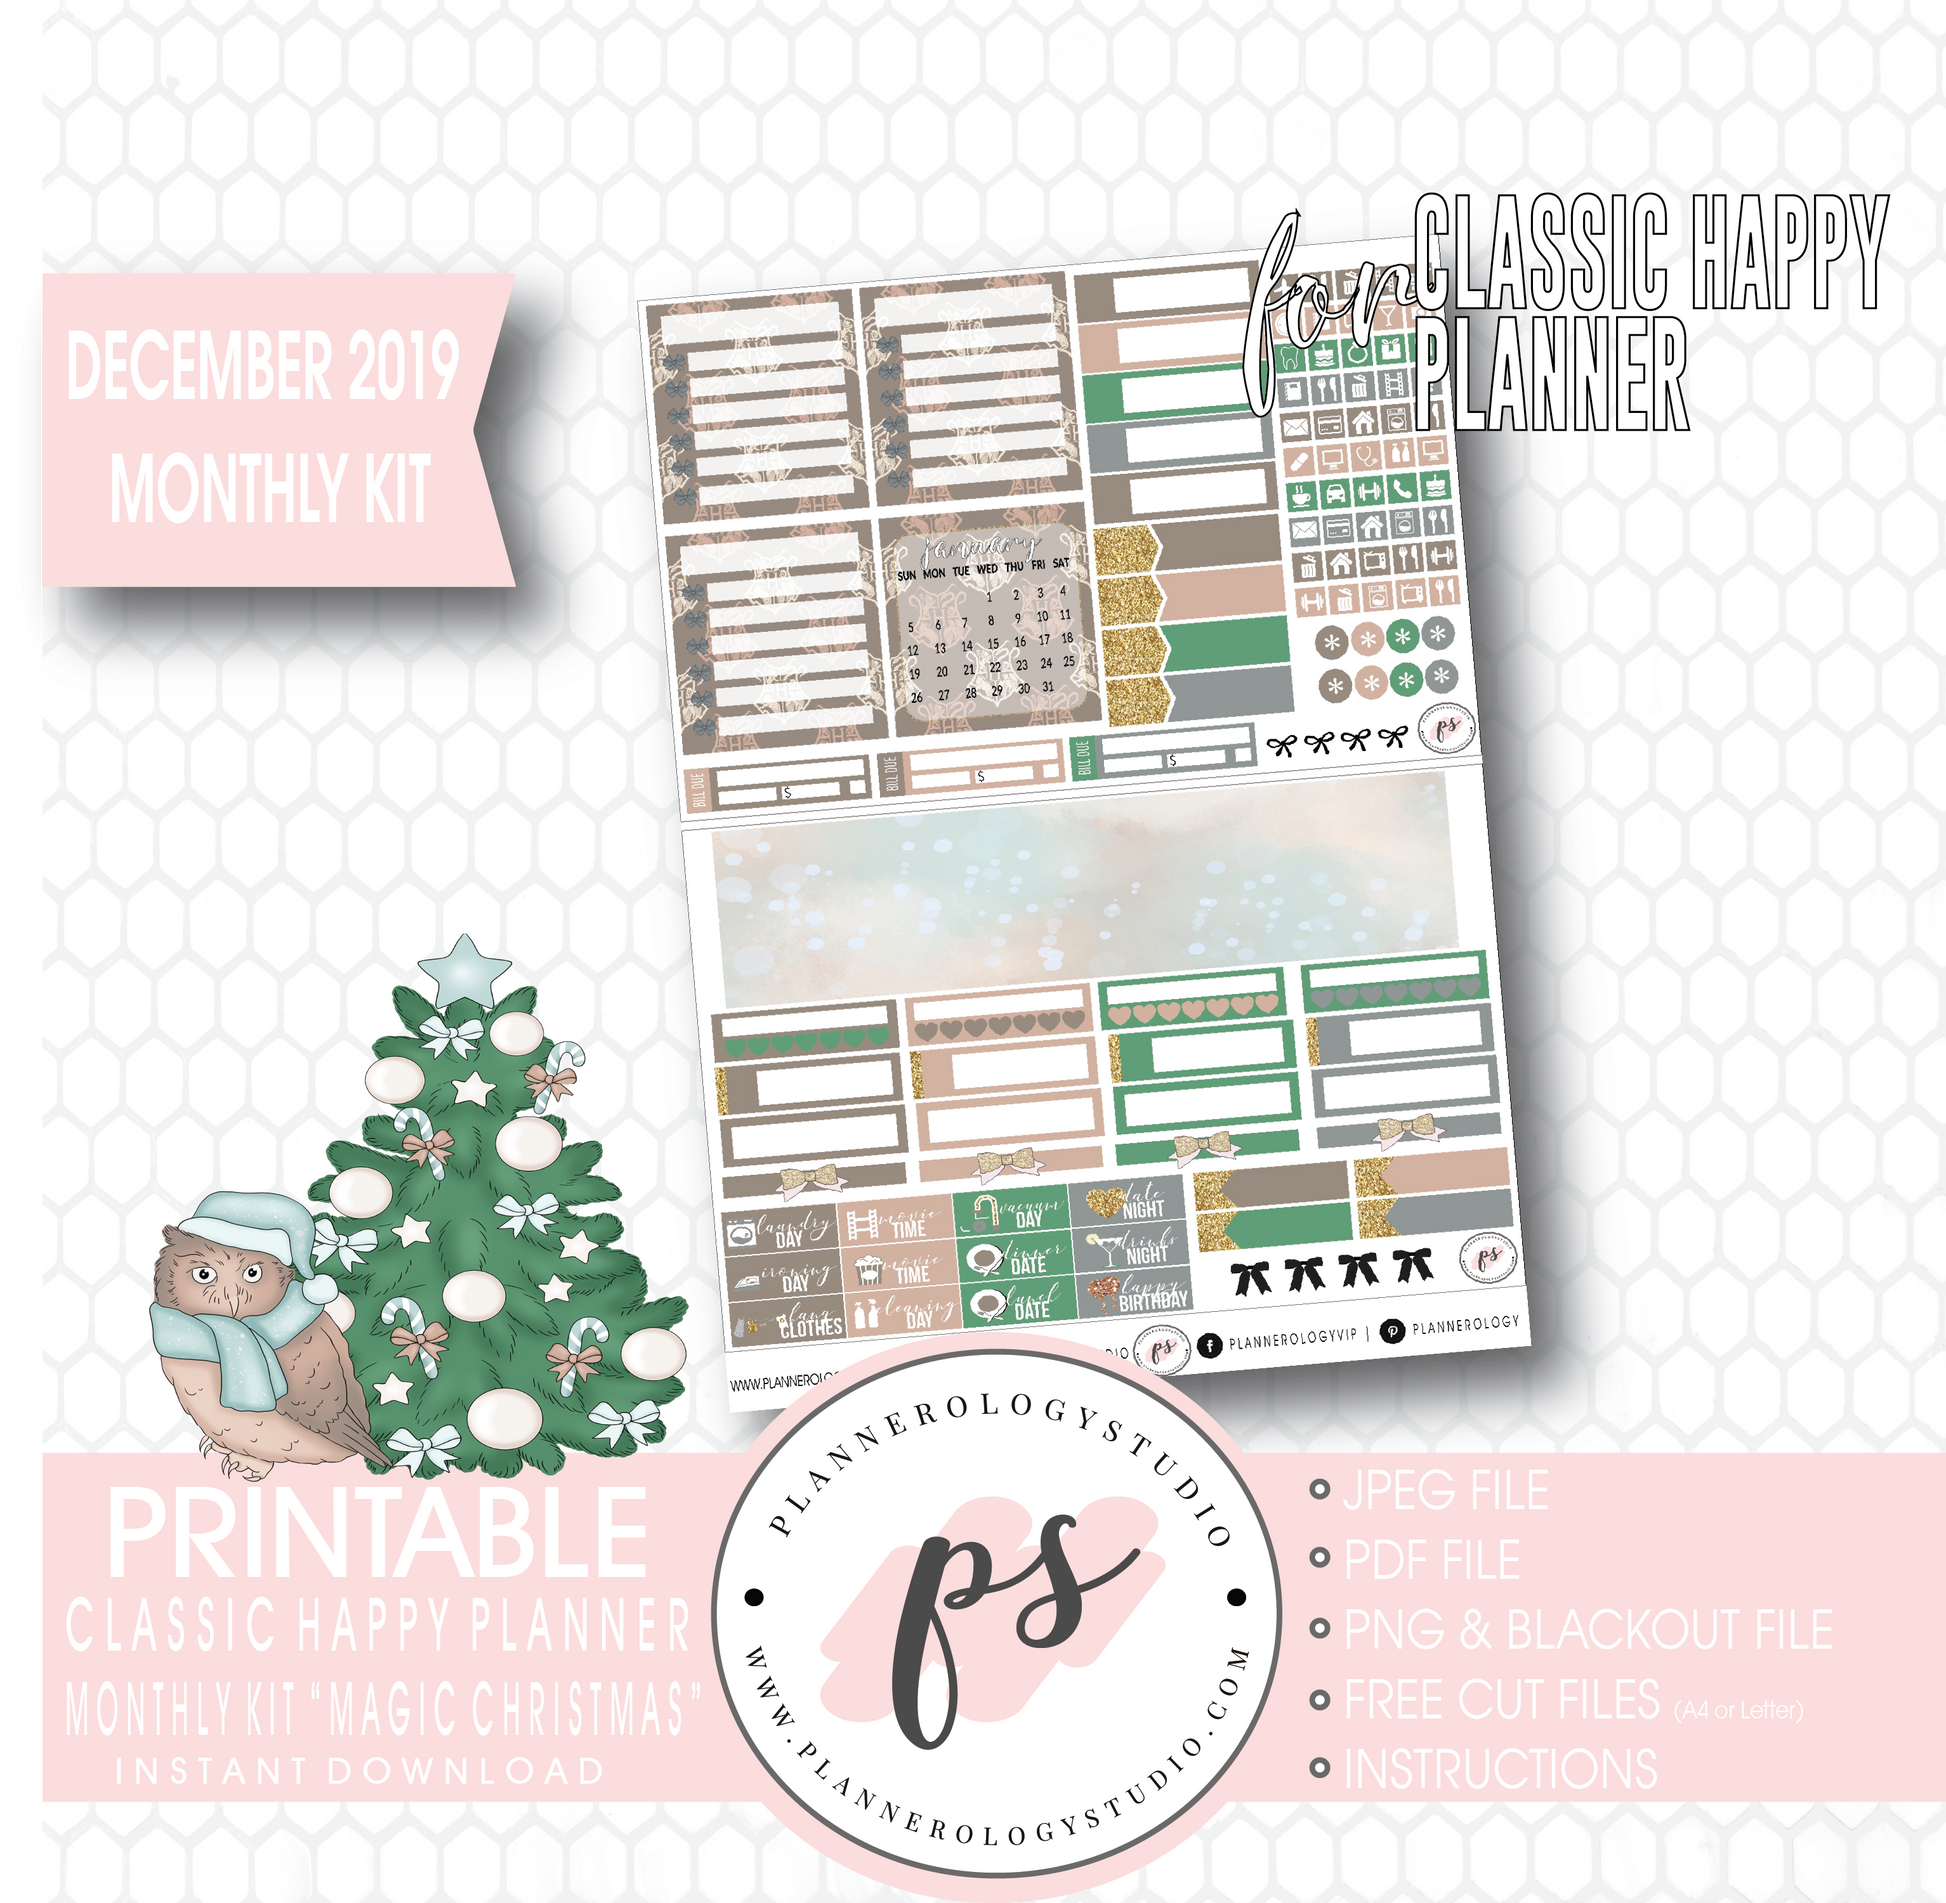 Magic Christmas December 2019 Monthly View Kit Digital Printable Planner Stickers (for use with Classic Happy Planner) - Plannerologystudio